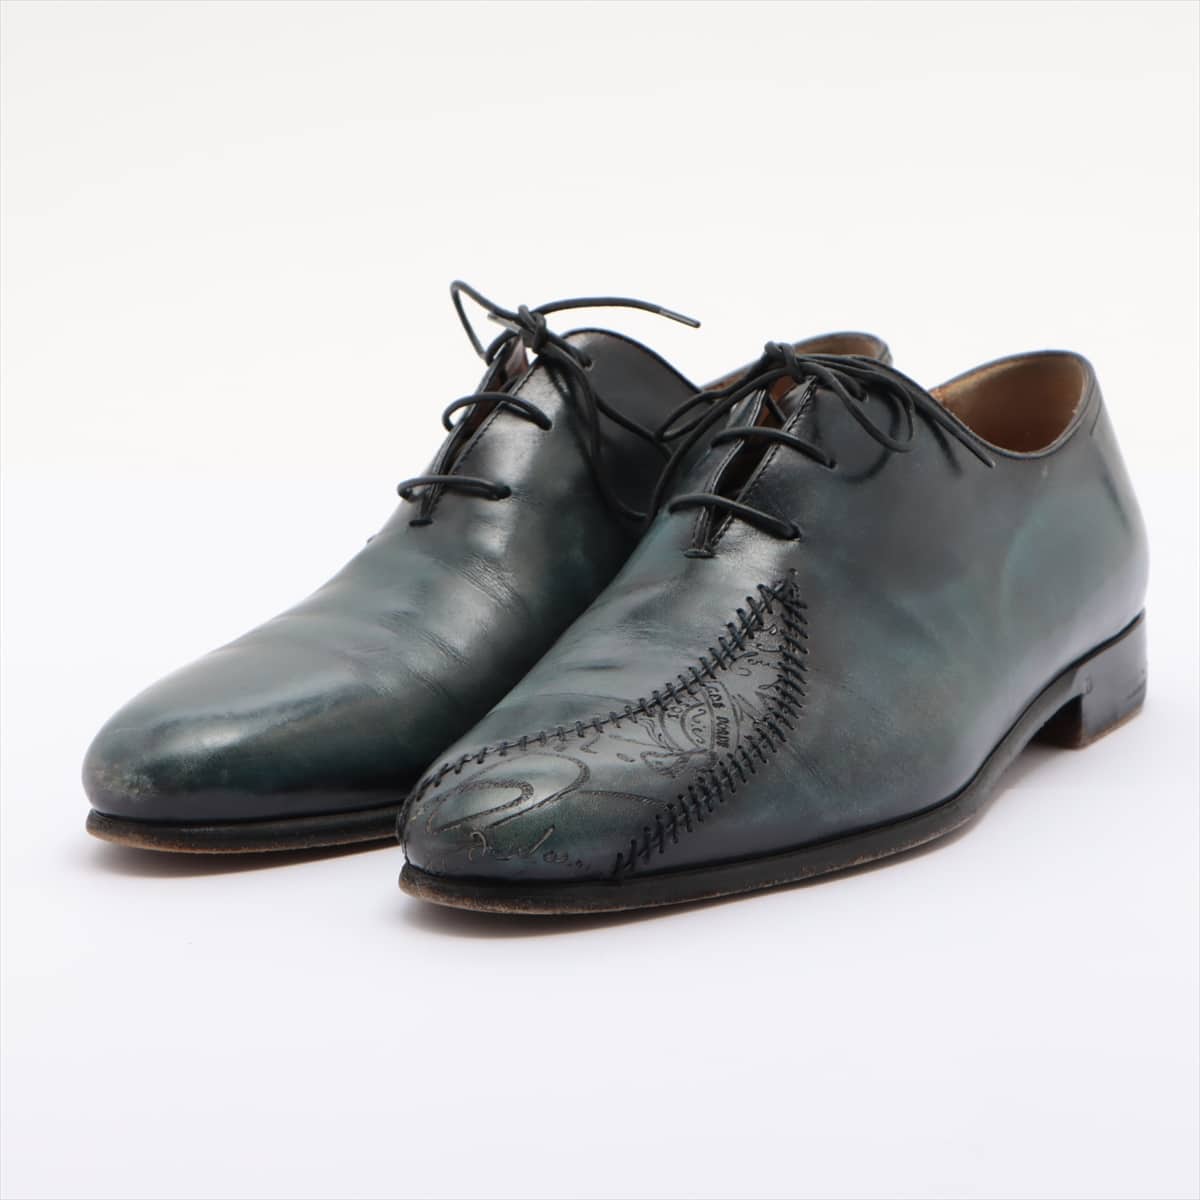 Berluti Leather Leather shoes 8 1/2 Men's Green Lapier-Serprizée Hand stitched With genuine shoe tree